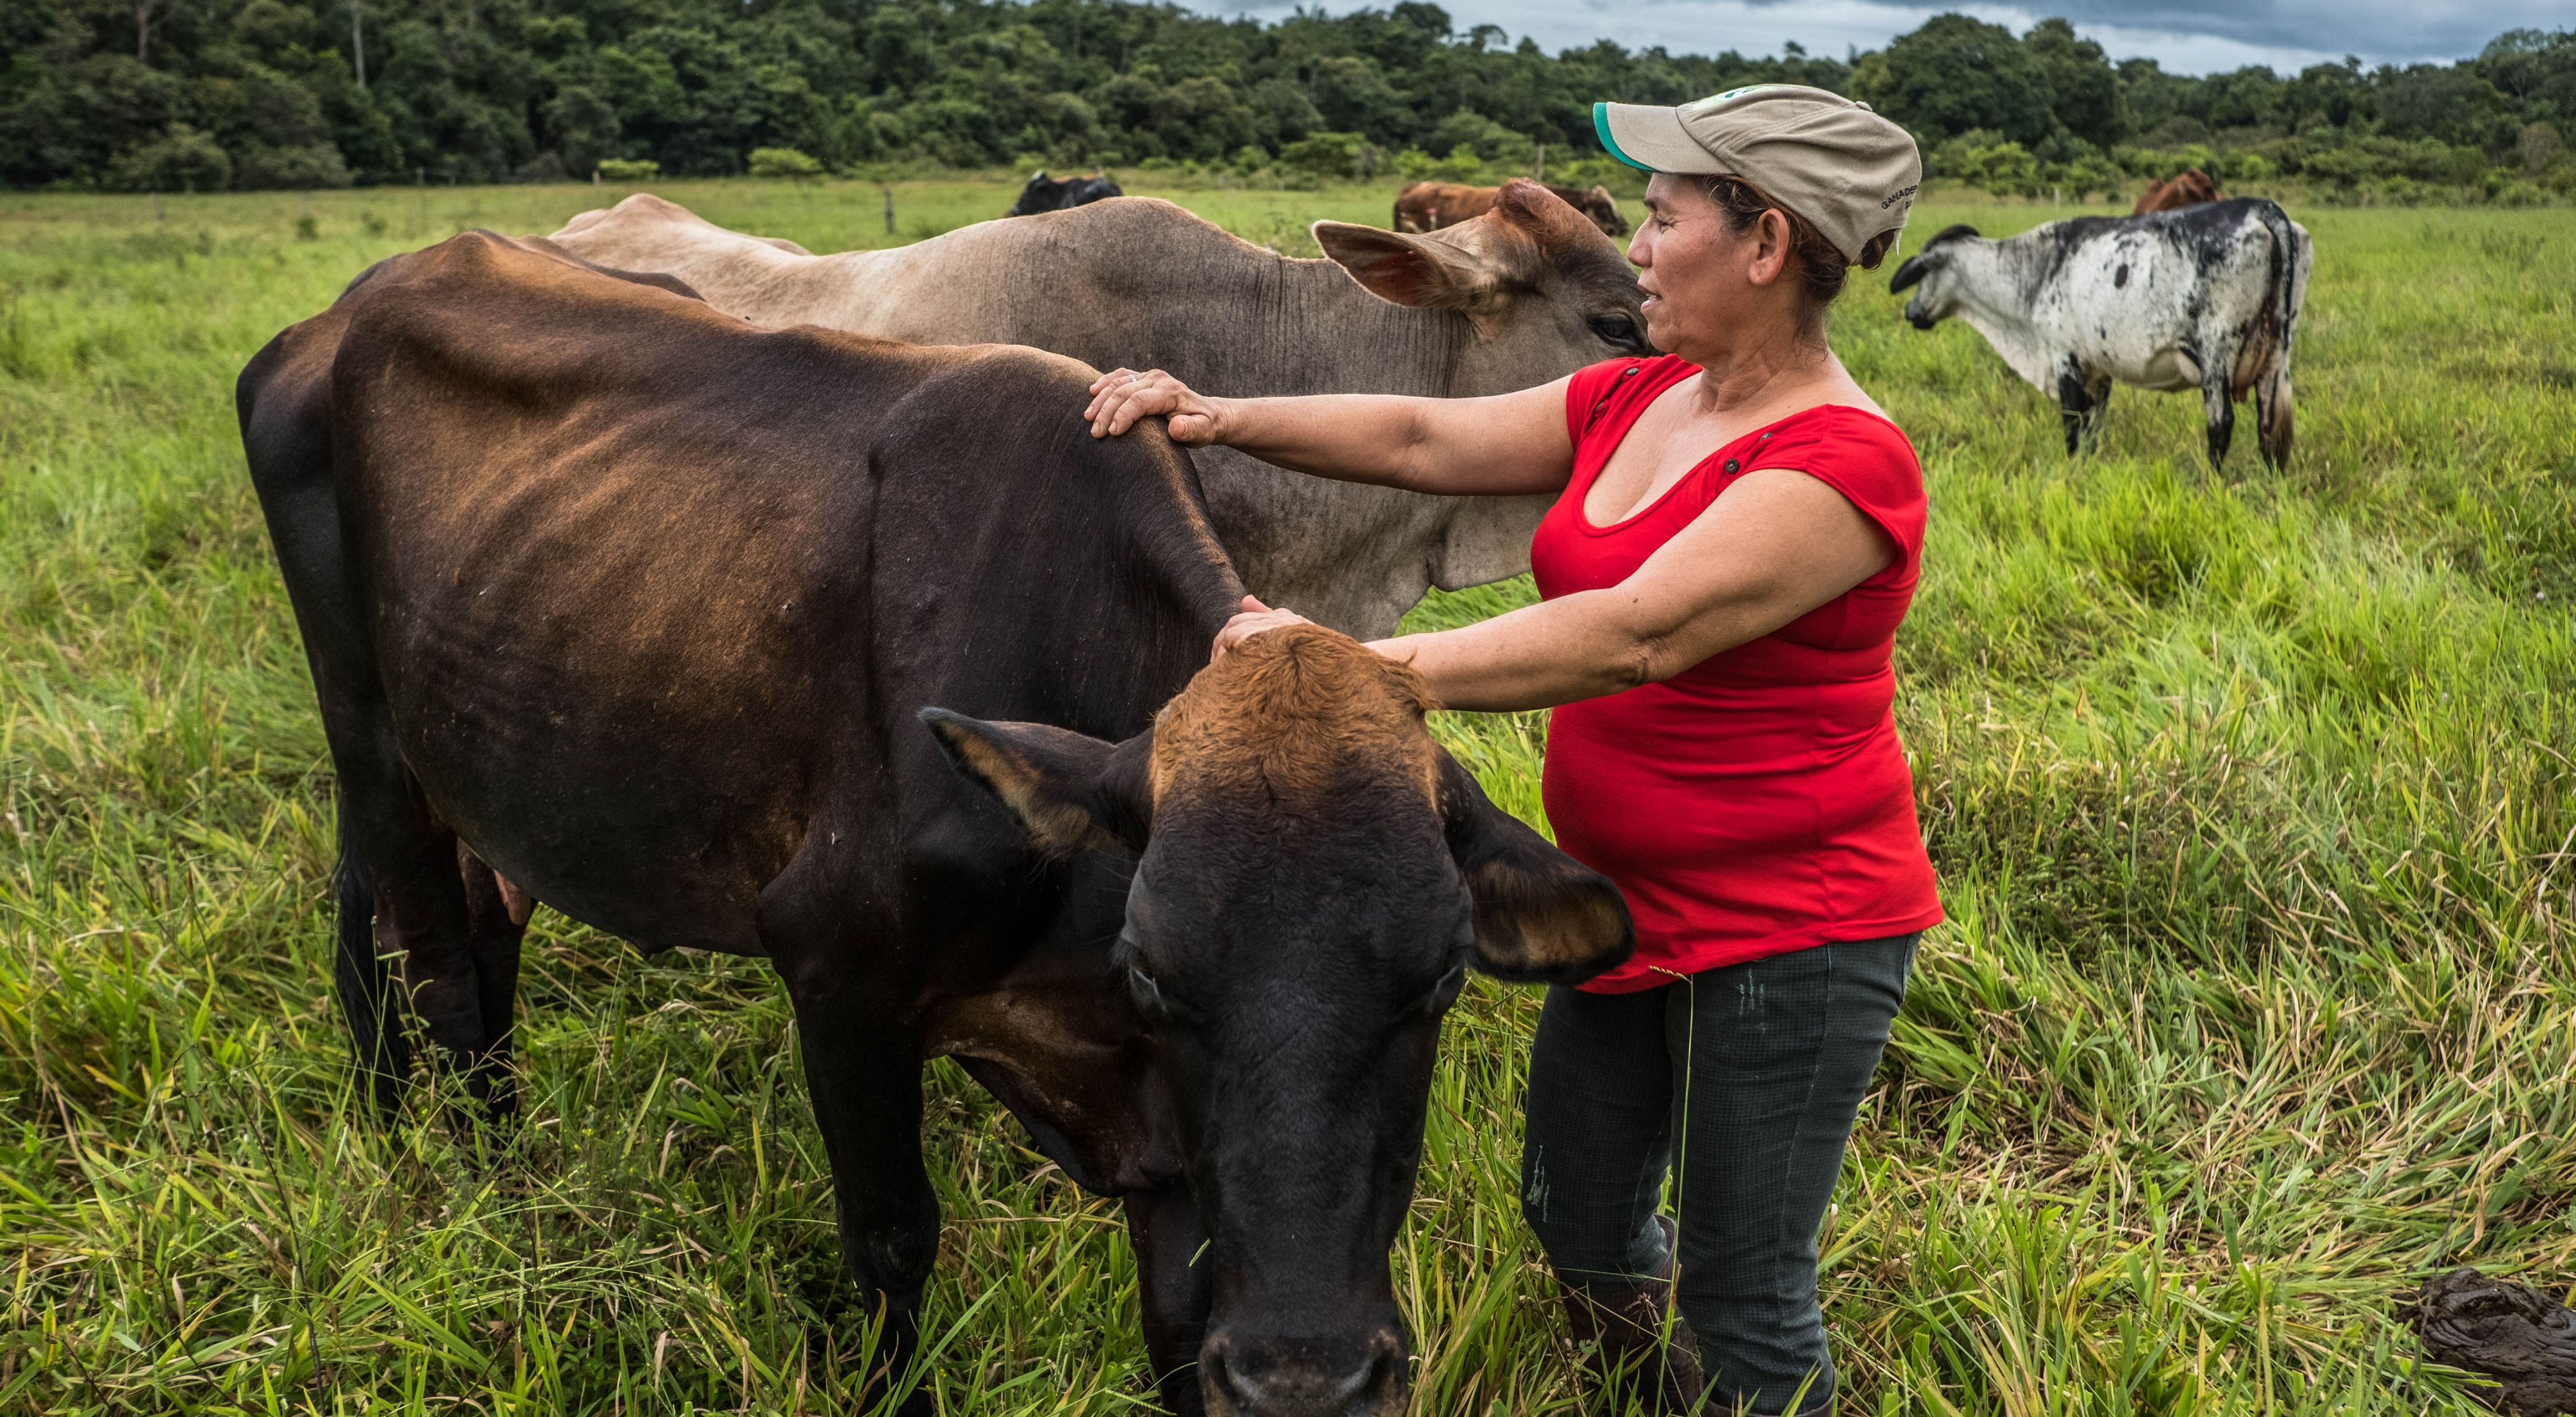 Mercedes Murillo attends to her cows on her farm, San Martin, Meta, Colombia where 16 acres of her land are designated for pastures.  